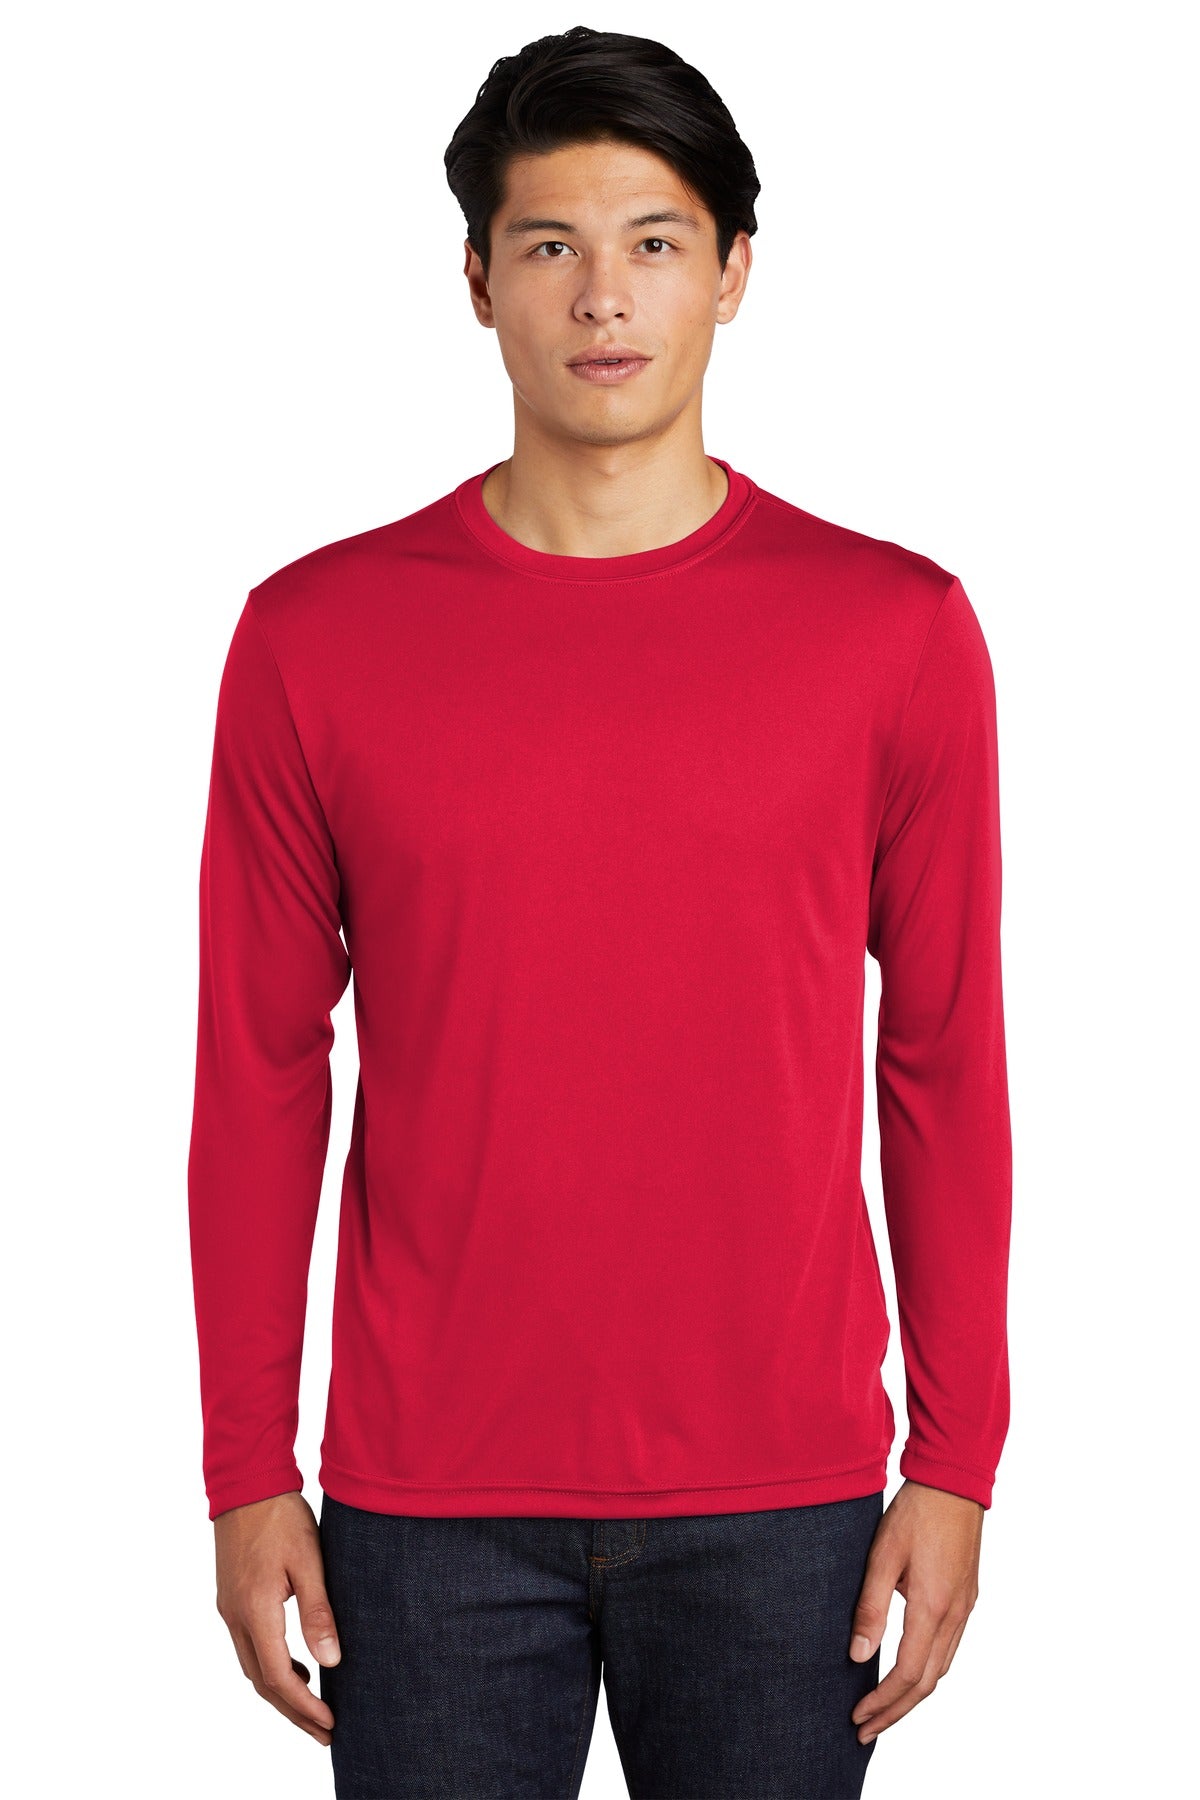 Next LevelSport-Tek® Long Sleeve PosiCharge® Competitor™ Tee. ST350LS